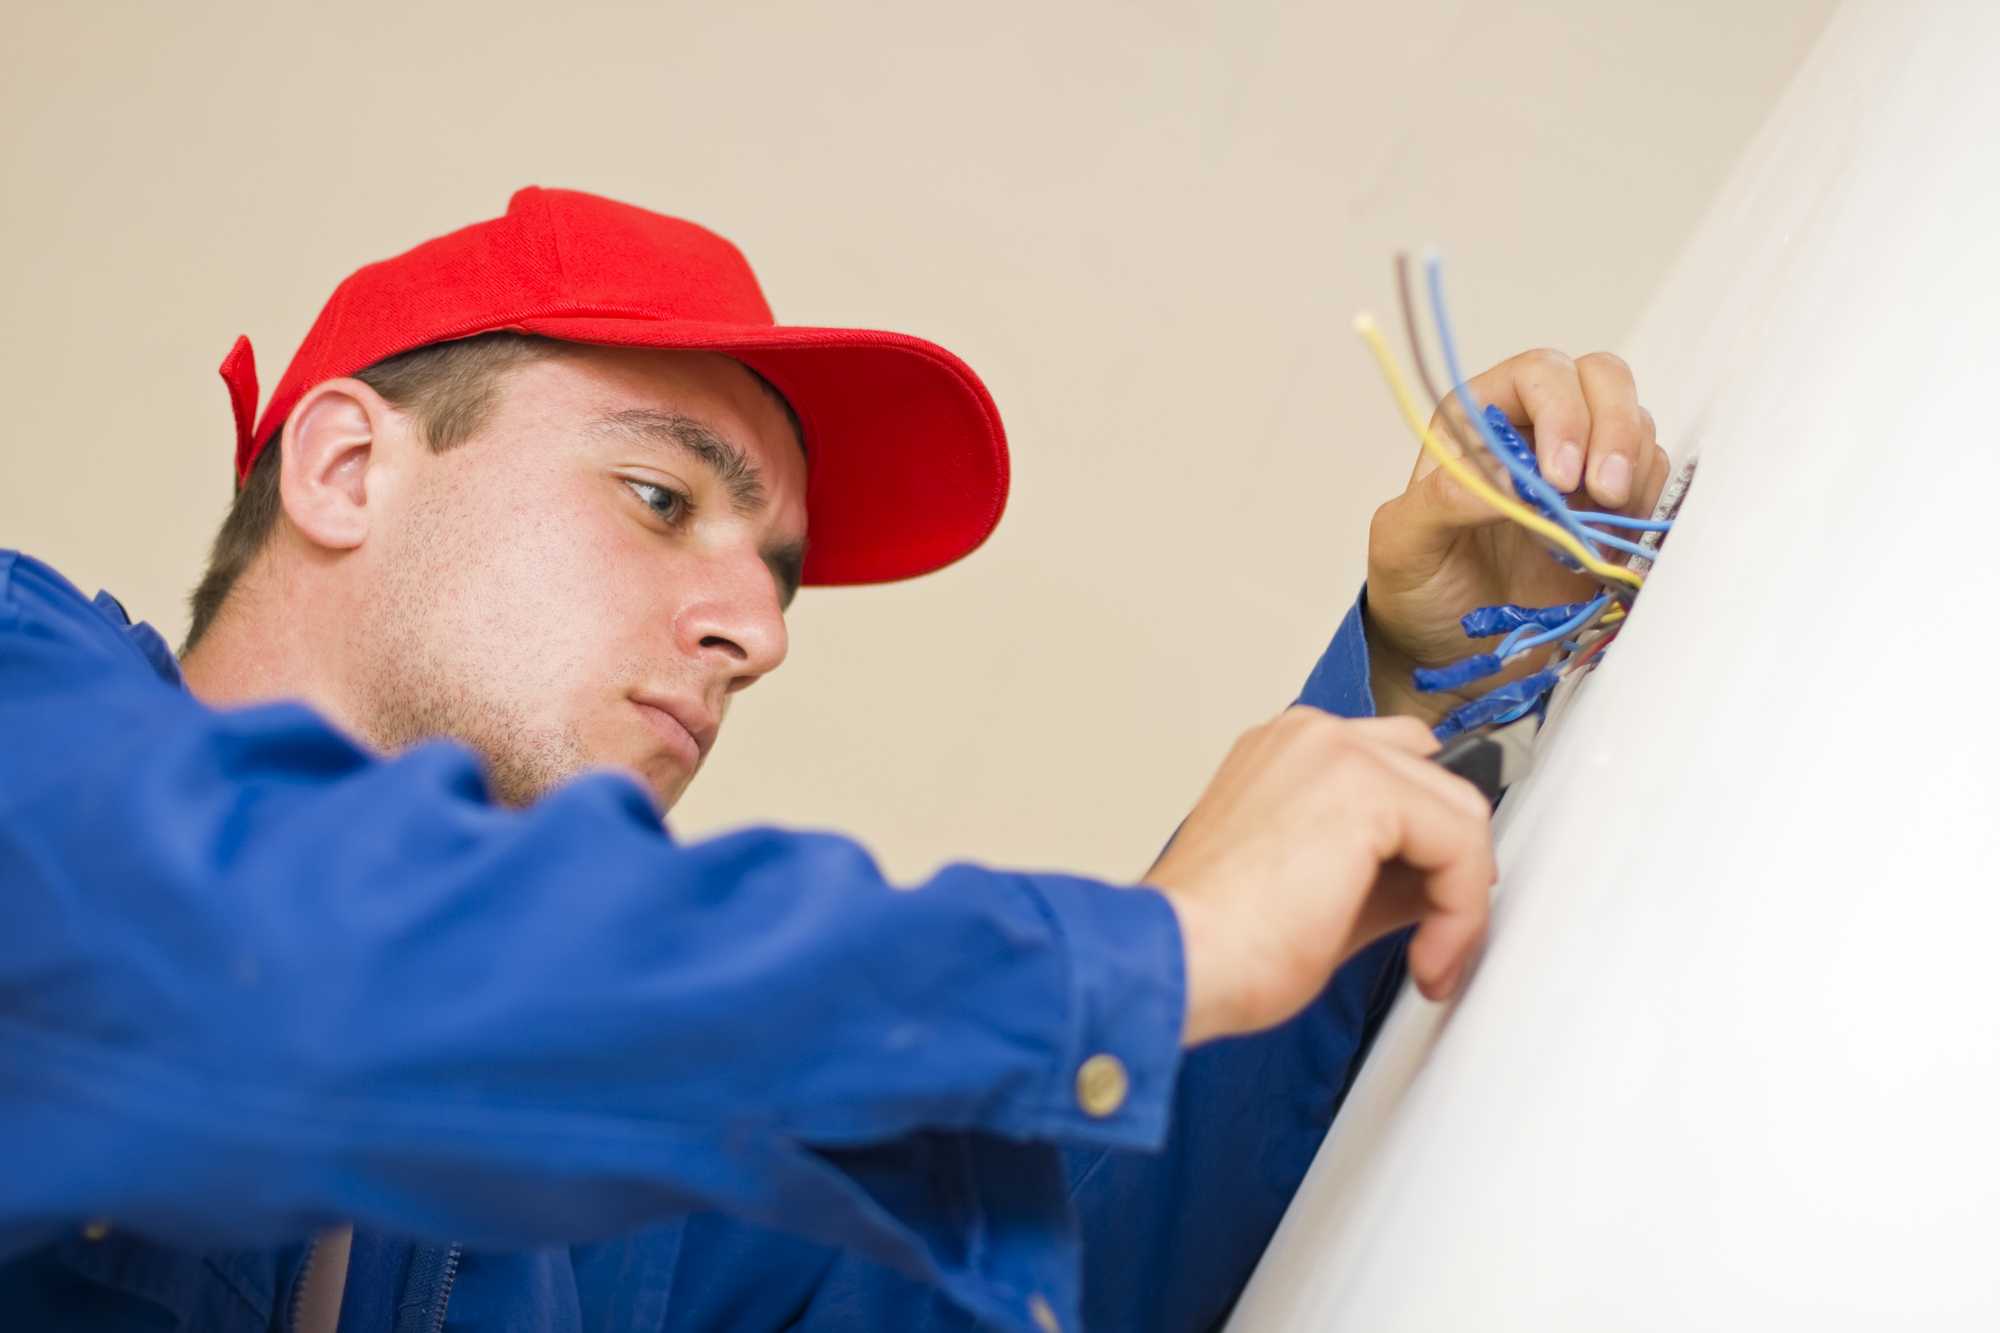 Choosing The Right Electrical Service Provider: Our Guide